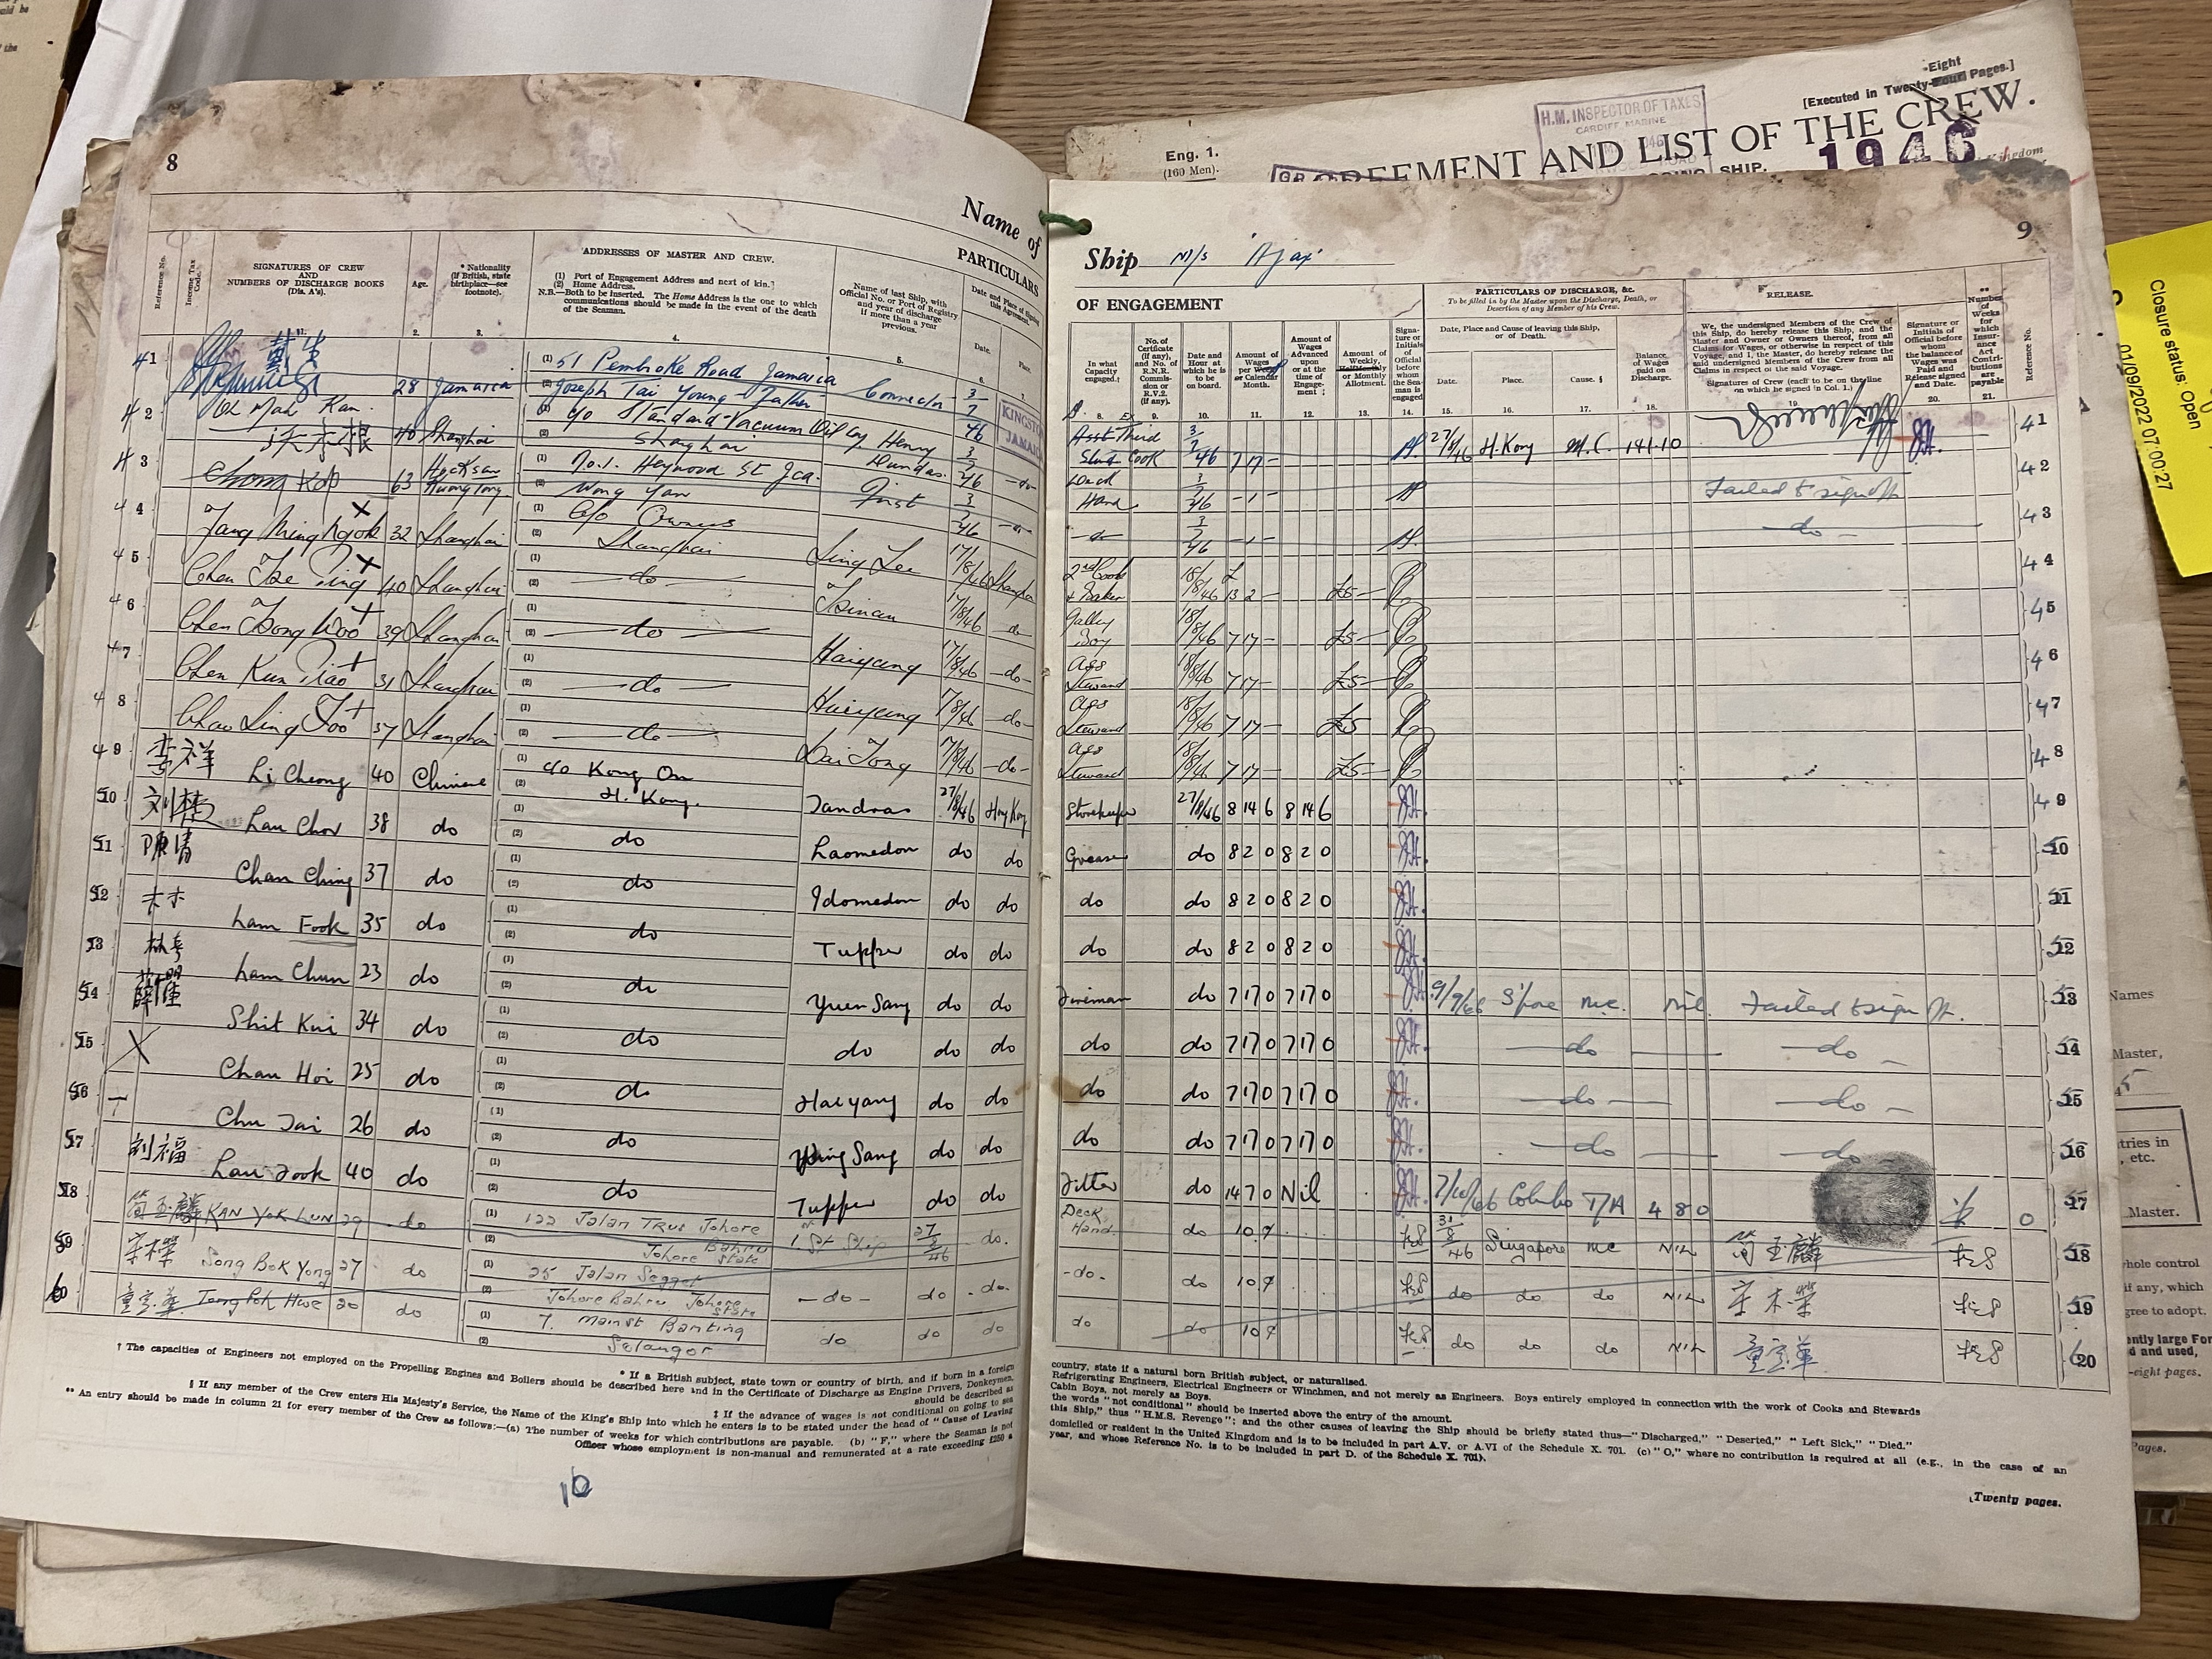 A crew list for the Holt company ship Ajax, showing the sailors' names in Chinese and English, as well as their ages, occupations and place and date of discharged. /National Archives/Simon Morris/CGTN